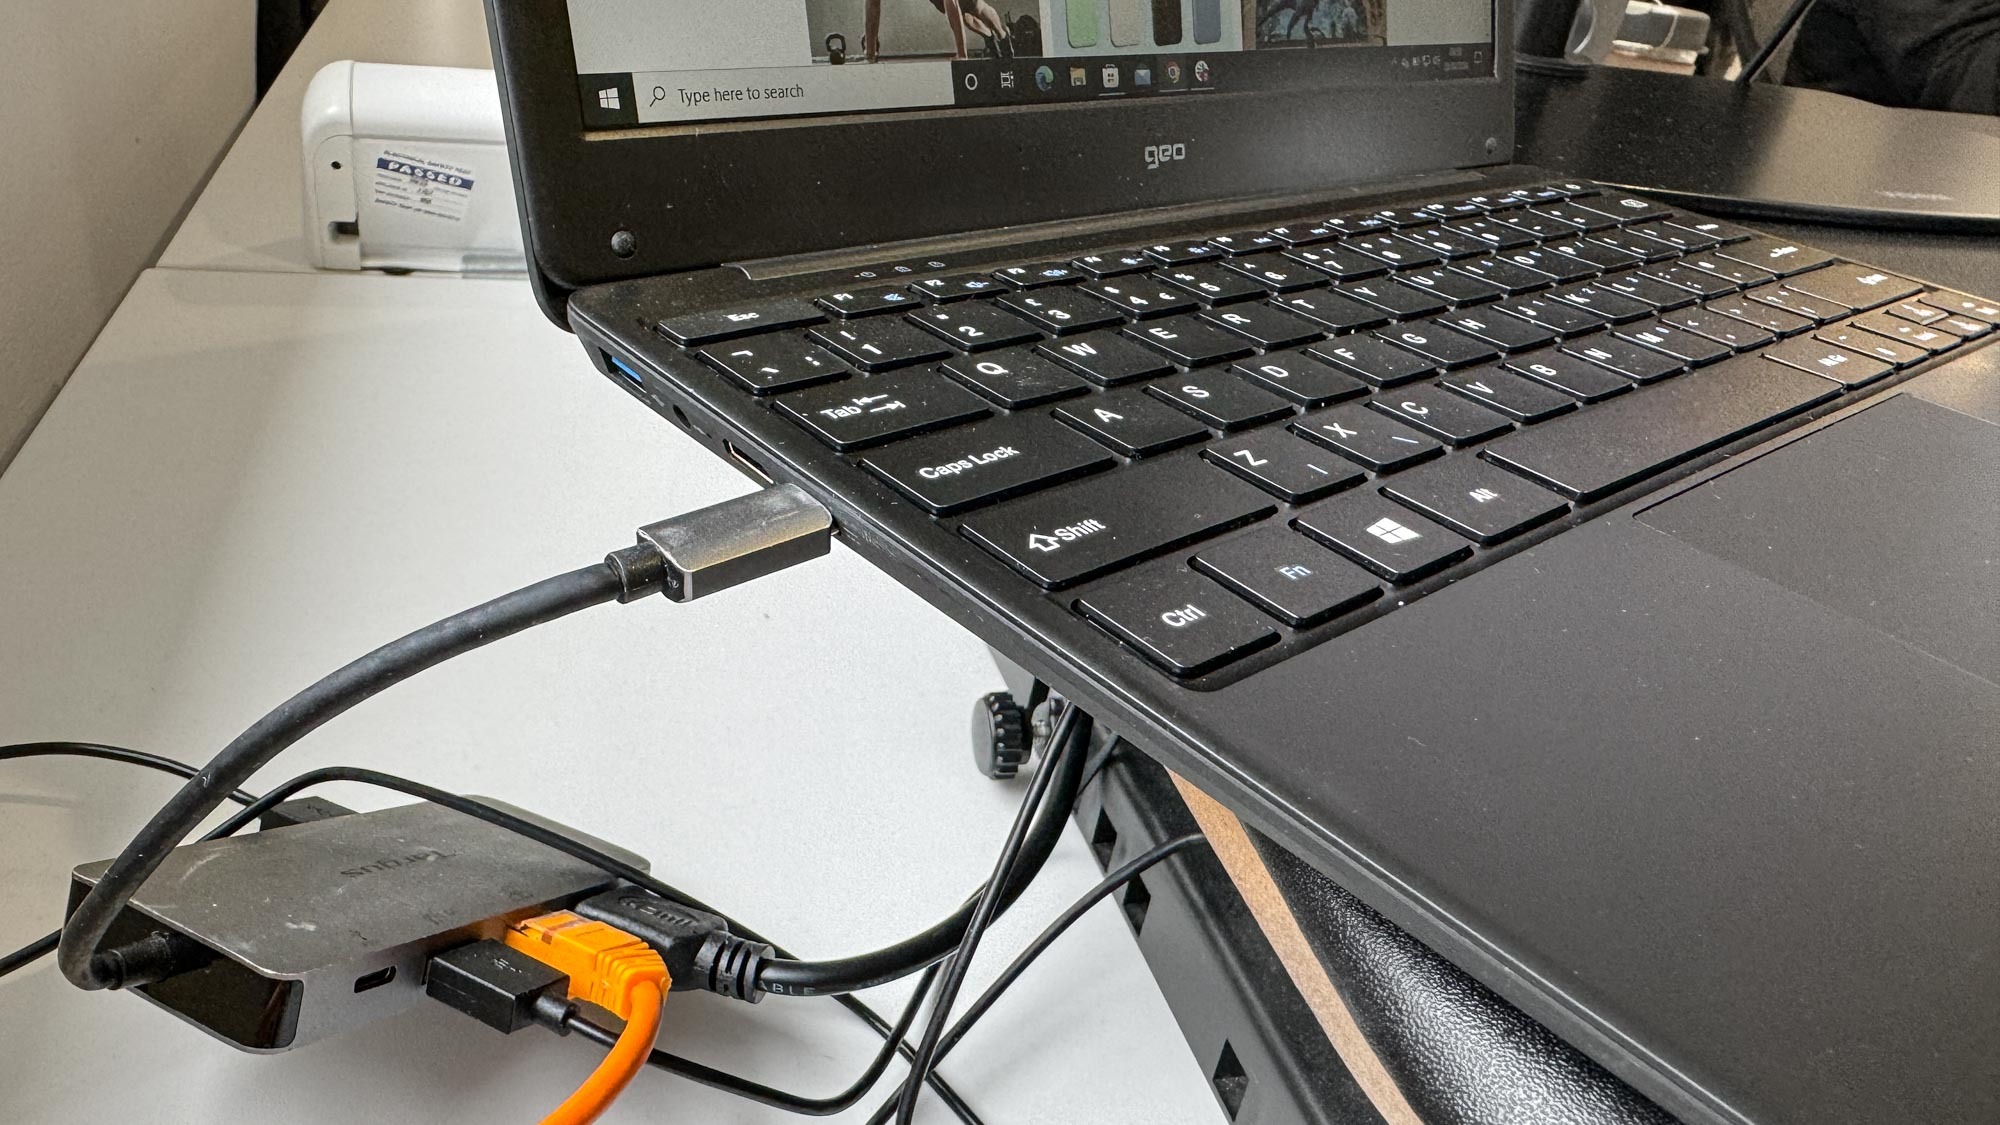 The Geobook 2E budget laptop ports with a dongle attached to an external monitor and keyboard